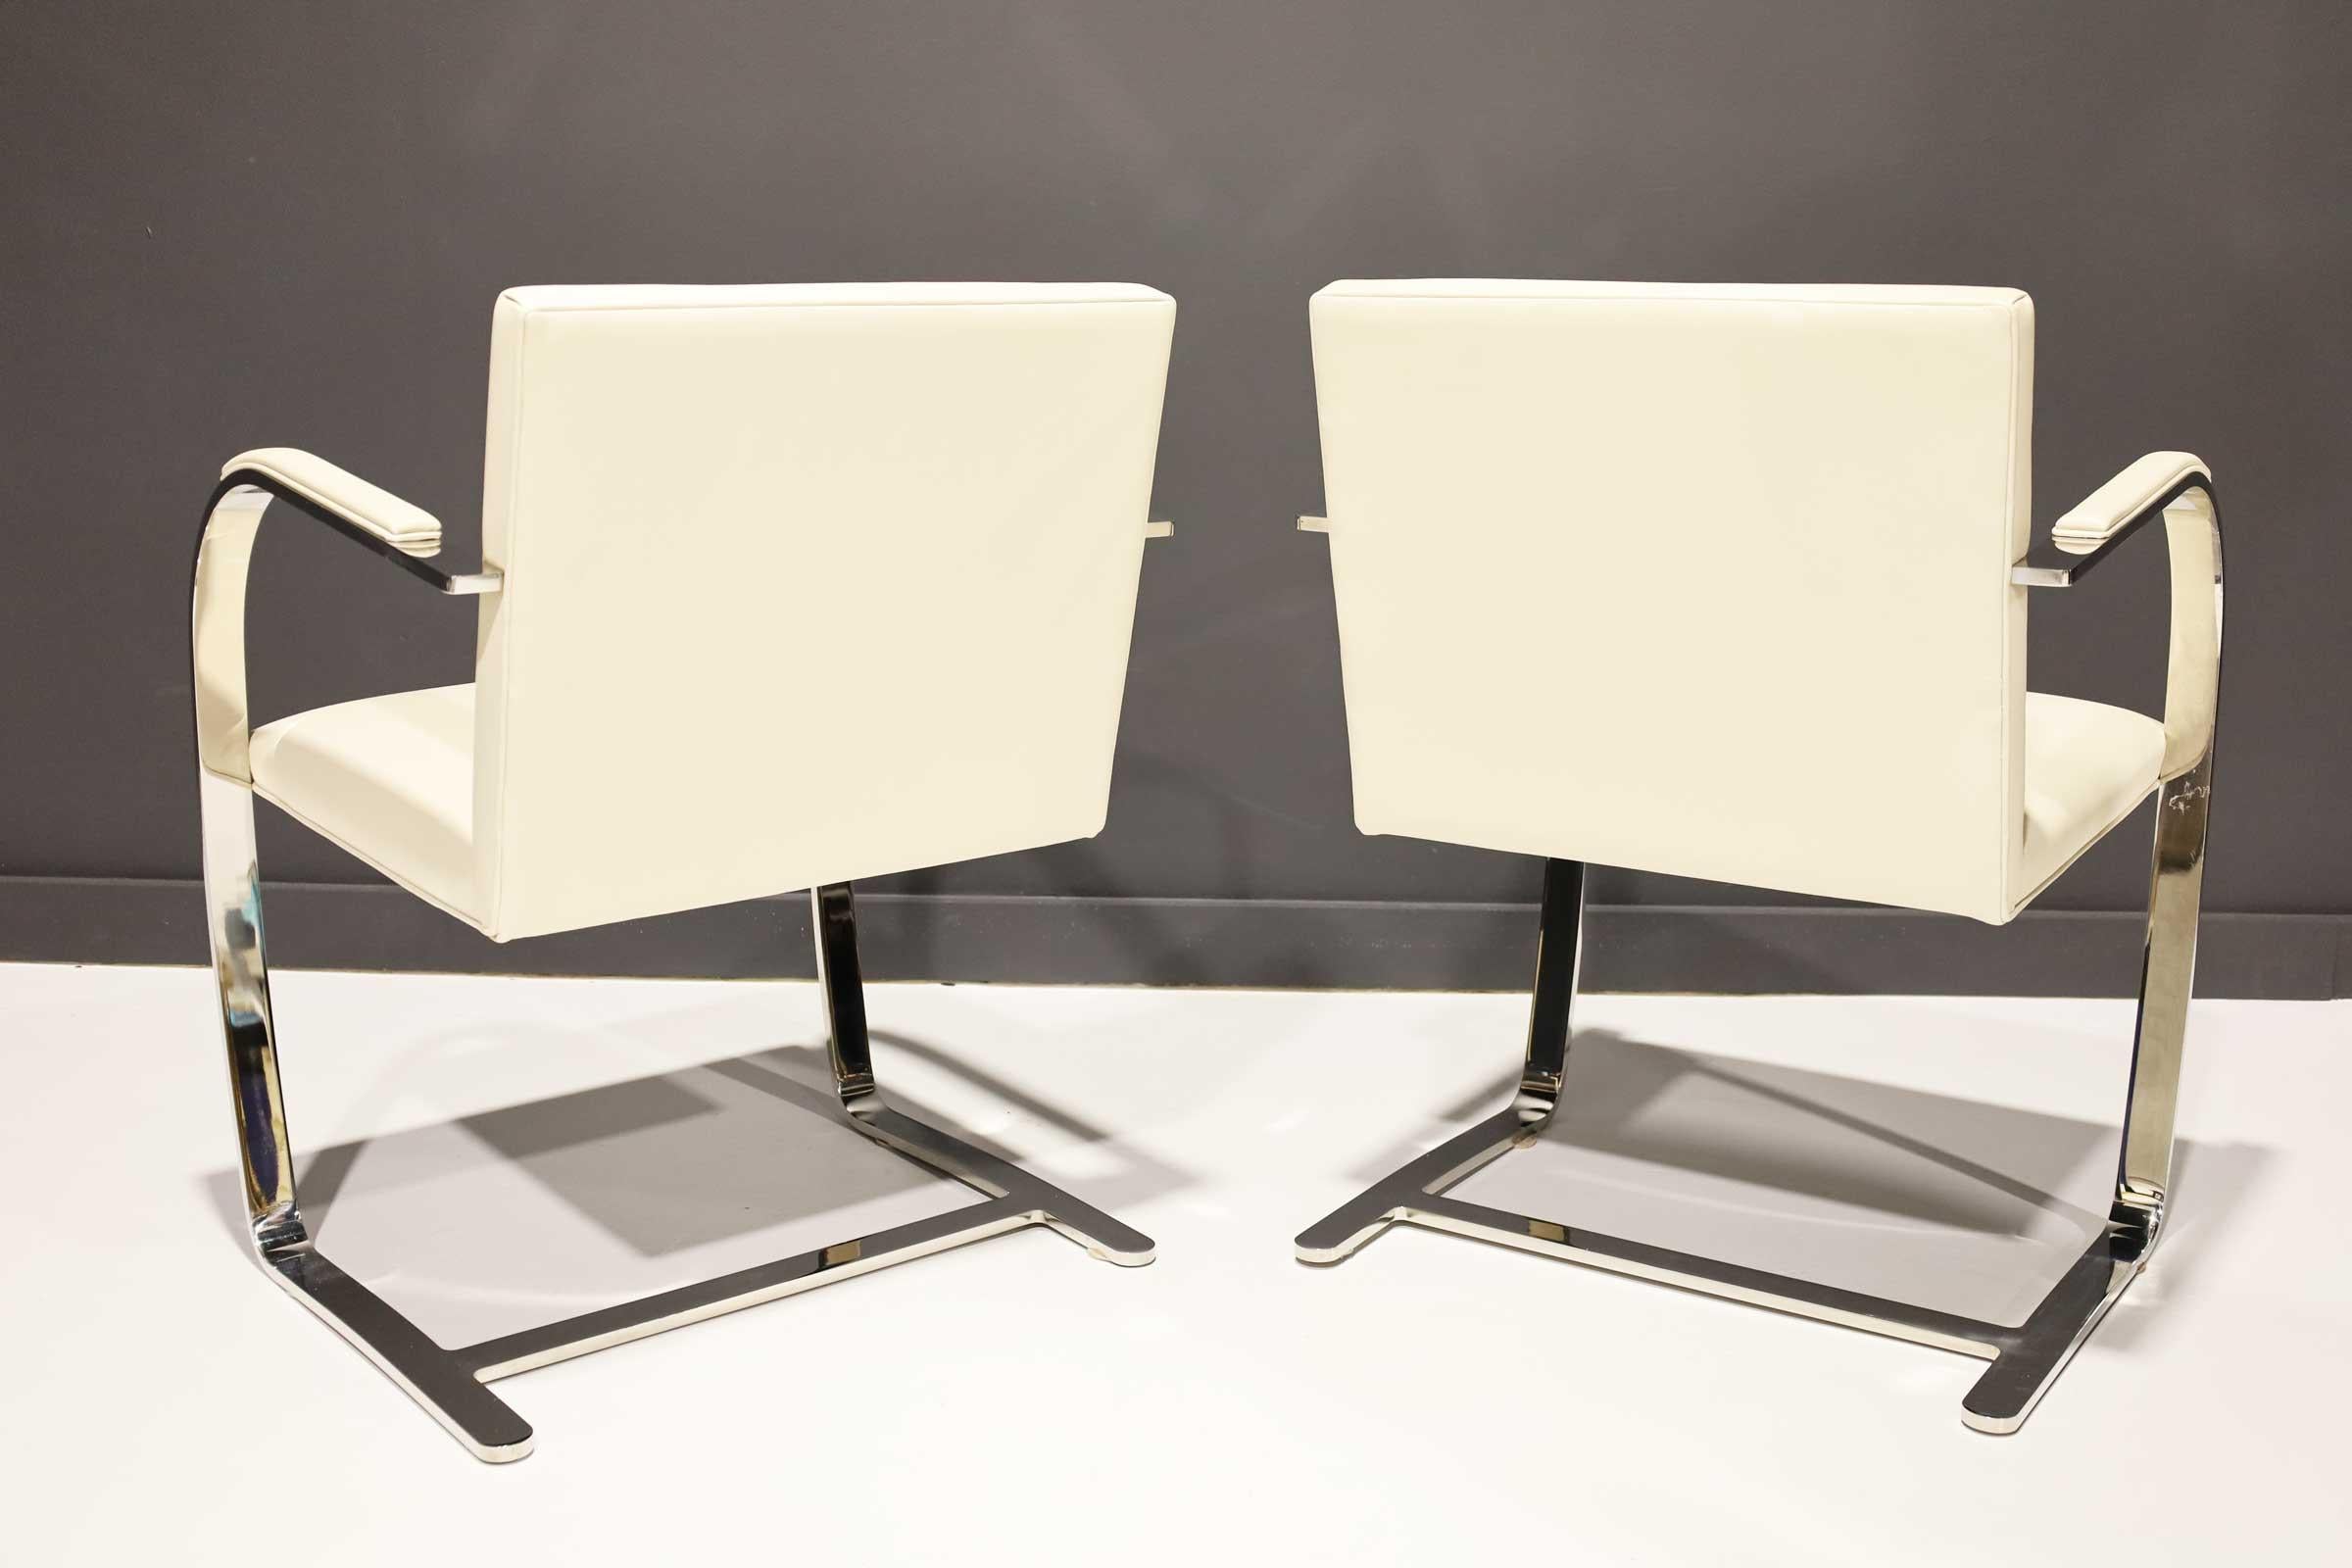 American Mies Van Der Rohe Stainless Steel Brno Chairs by Knoll in Off-White Leather